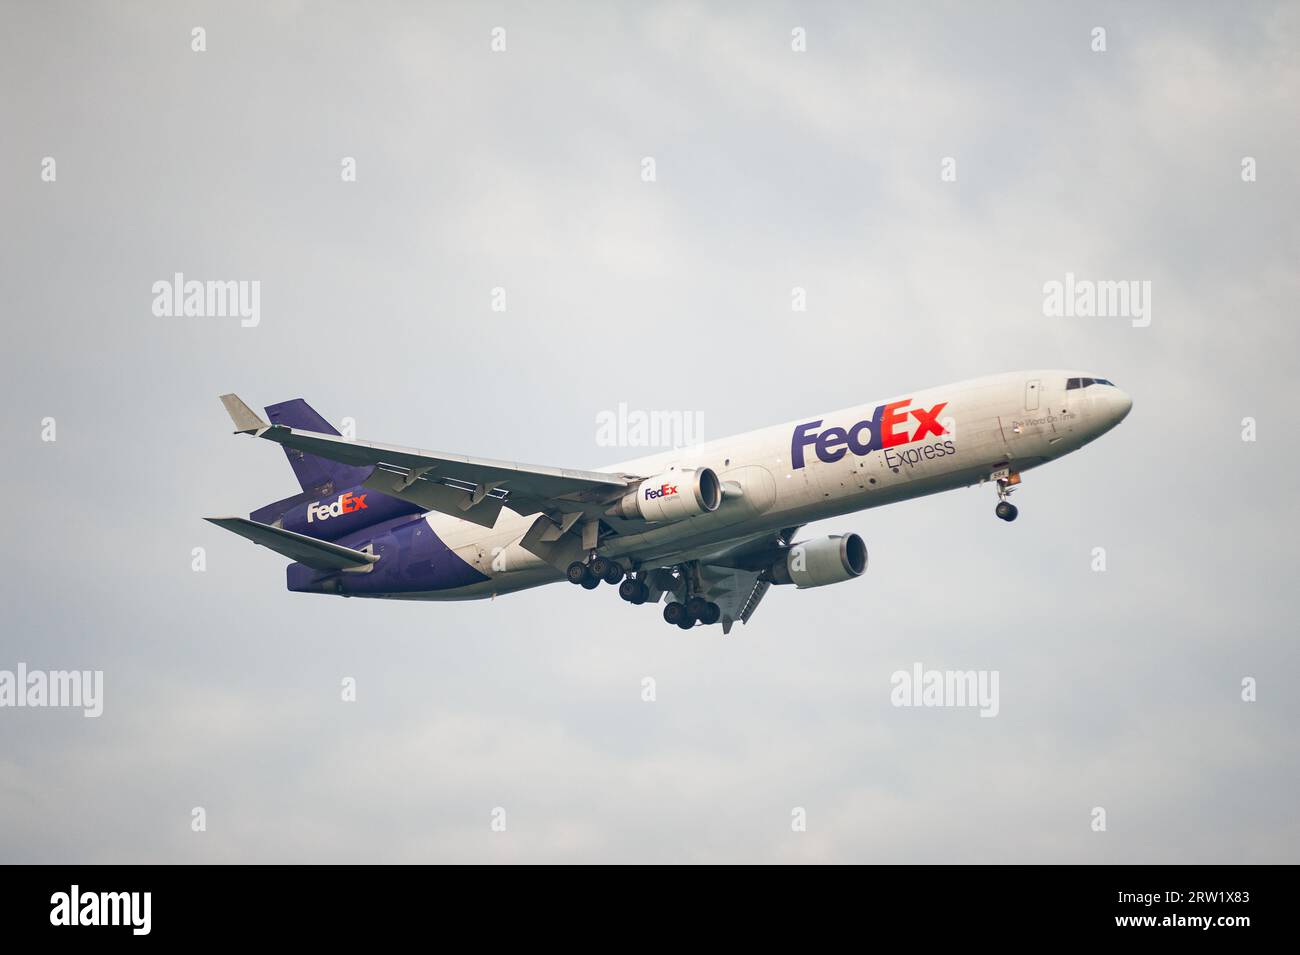 02.08.2023, Republic of Singapore, , Singapore - A US Federal Express (FedEx) McDonnell Douglas MD-11F cargo aircraft with registration N584FE on appr Stock Photo